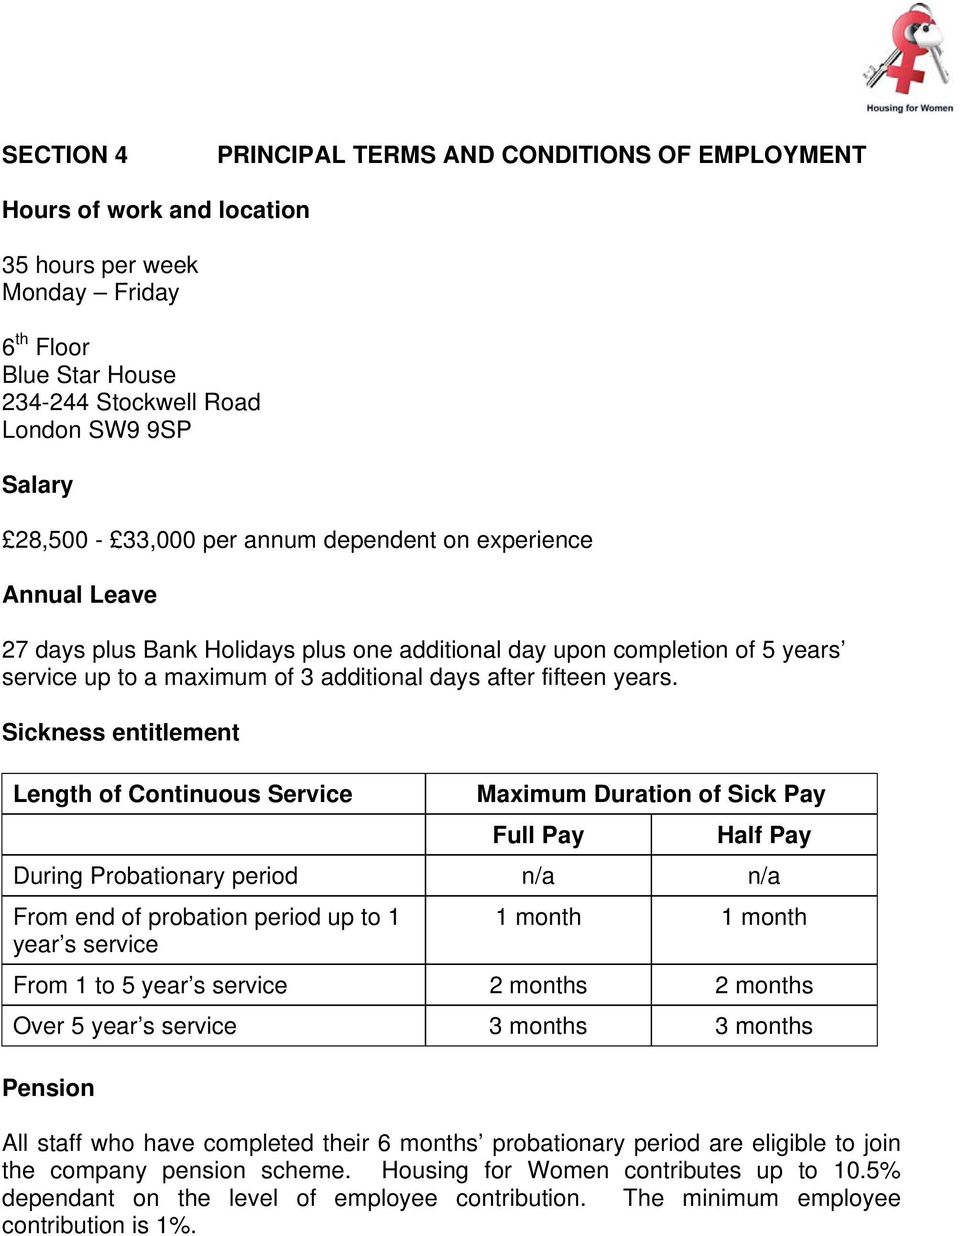 Sickness entitlement Length of Continuous Service Maximum Duration of Sick Pay Full Pay Half Pay During Probationary period n/a n/a From end of probation period up to 1 year s service 1 month 1 month